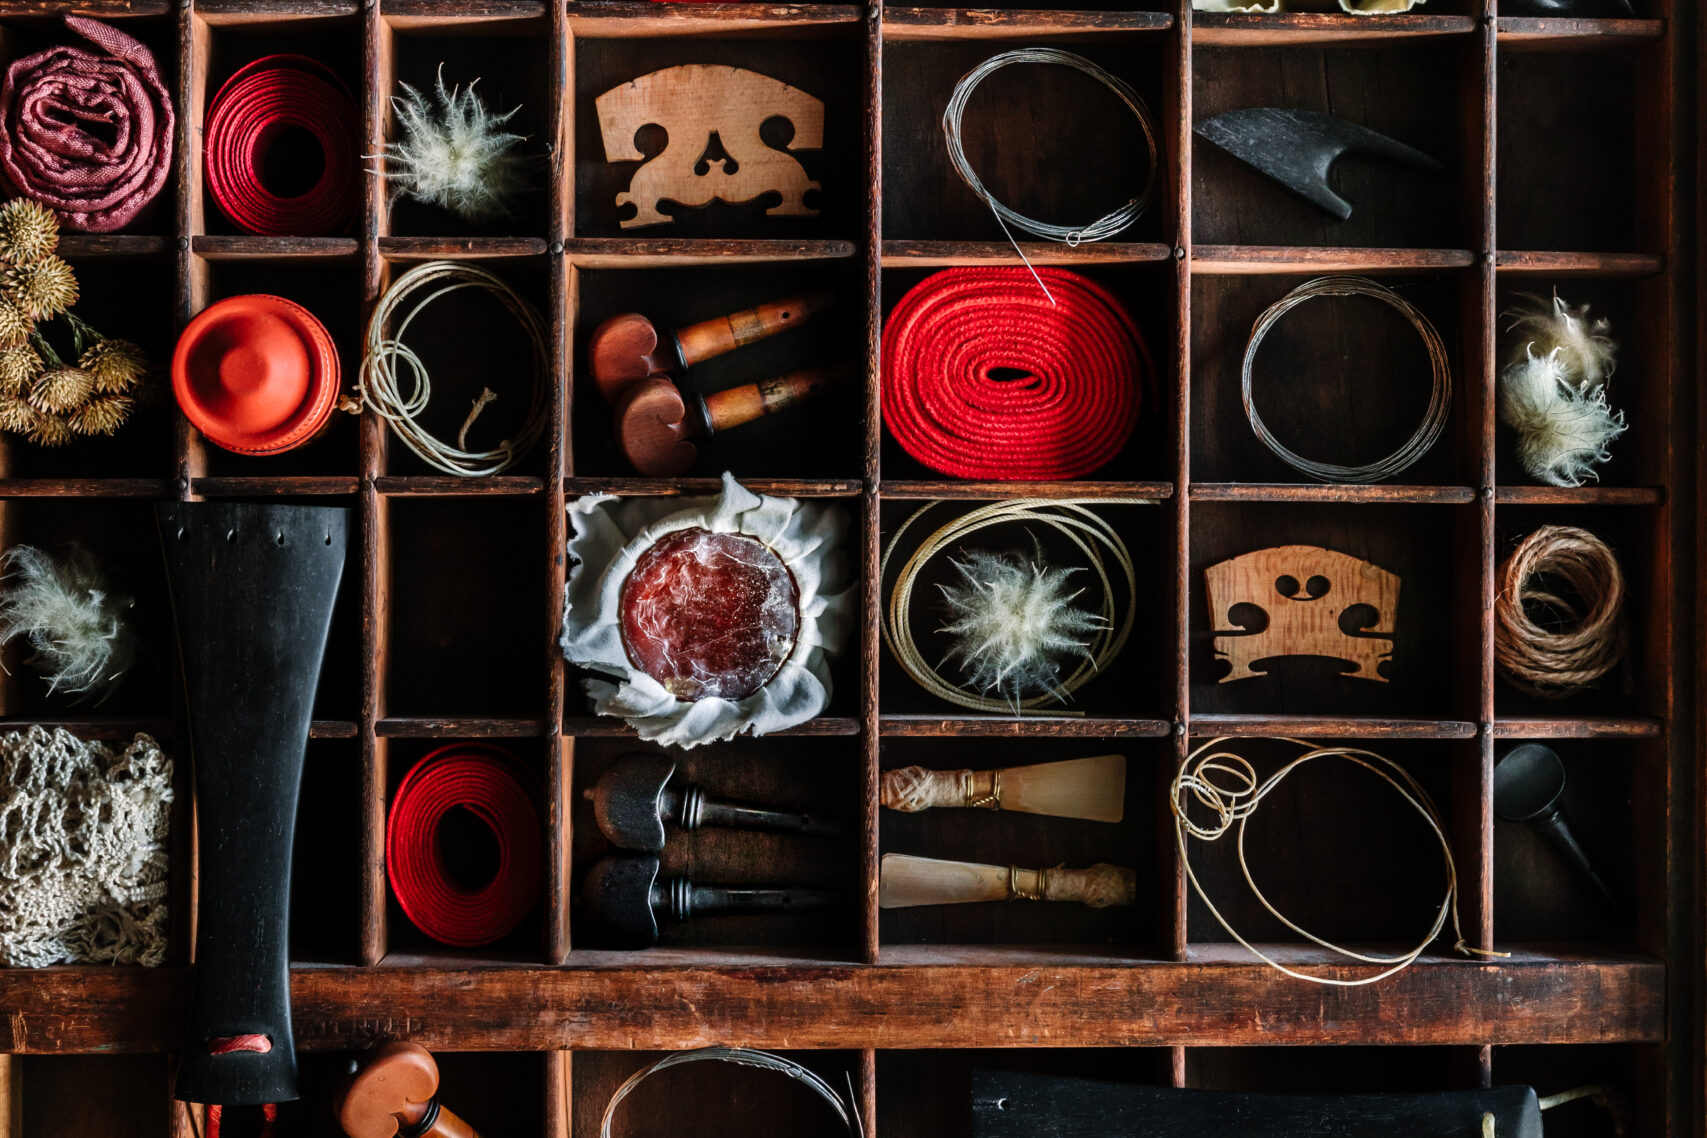 A shelf covering the whole wall with random objects, parts of instruments and yarn of wool